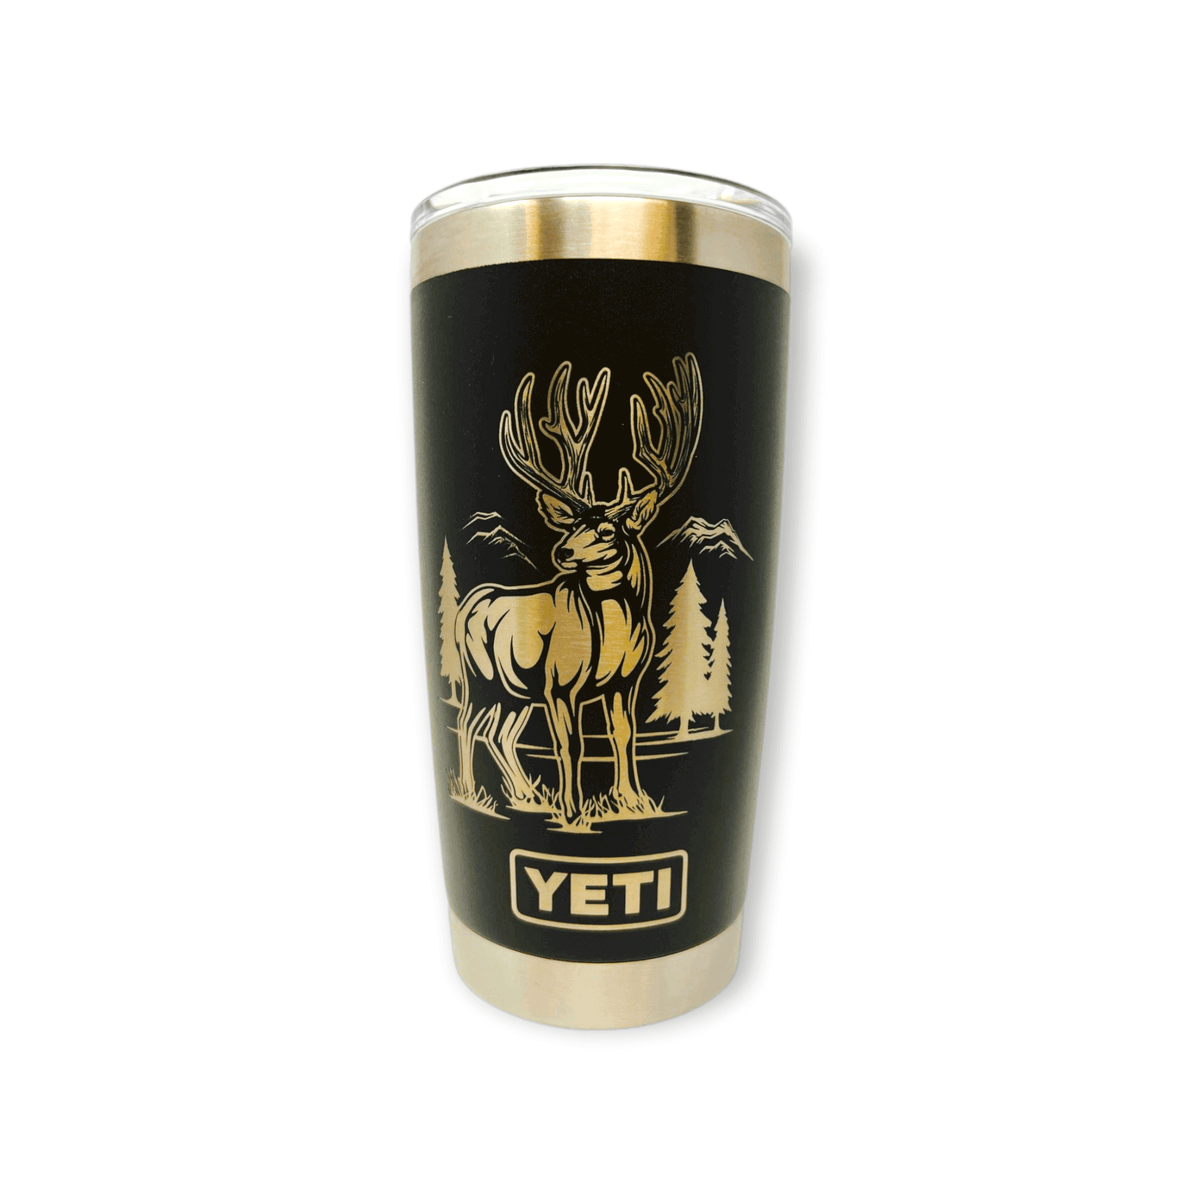 https://cdn.shopify.com/s/files/1/0606/5497/7184/products/wind-river_outpost_mule_deer-yeti_1200x.png?v=1690330692